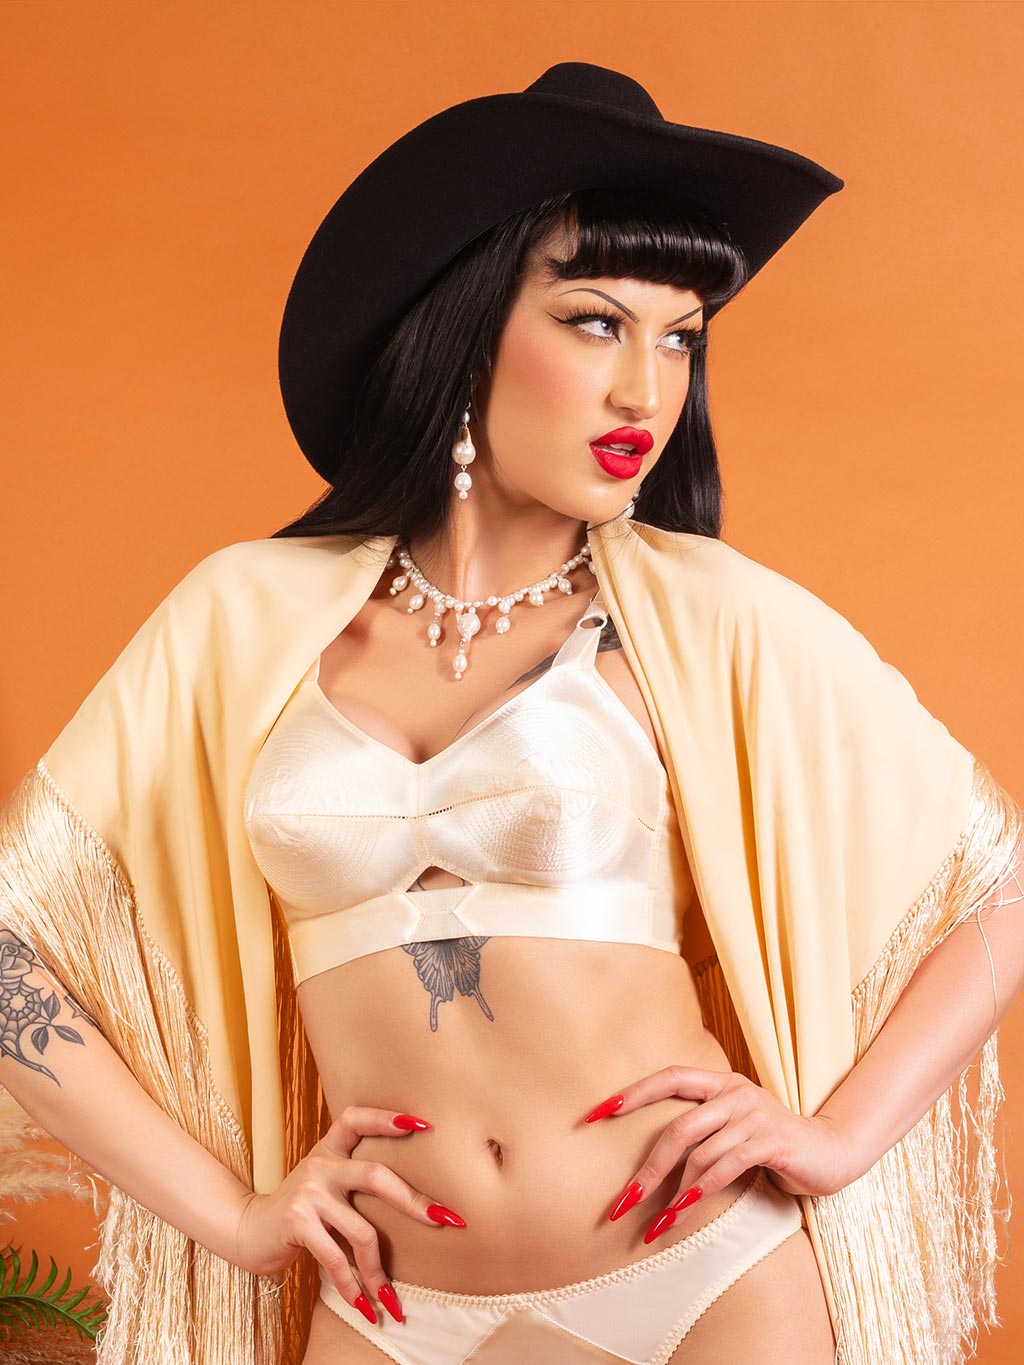 Model wearing Harlow peach satin bullet bra, demonstrating iconic conical shape